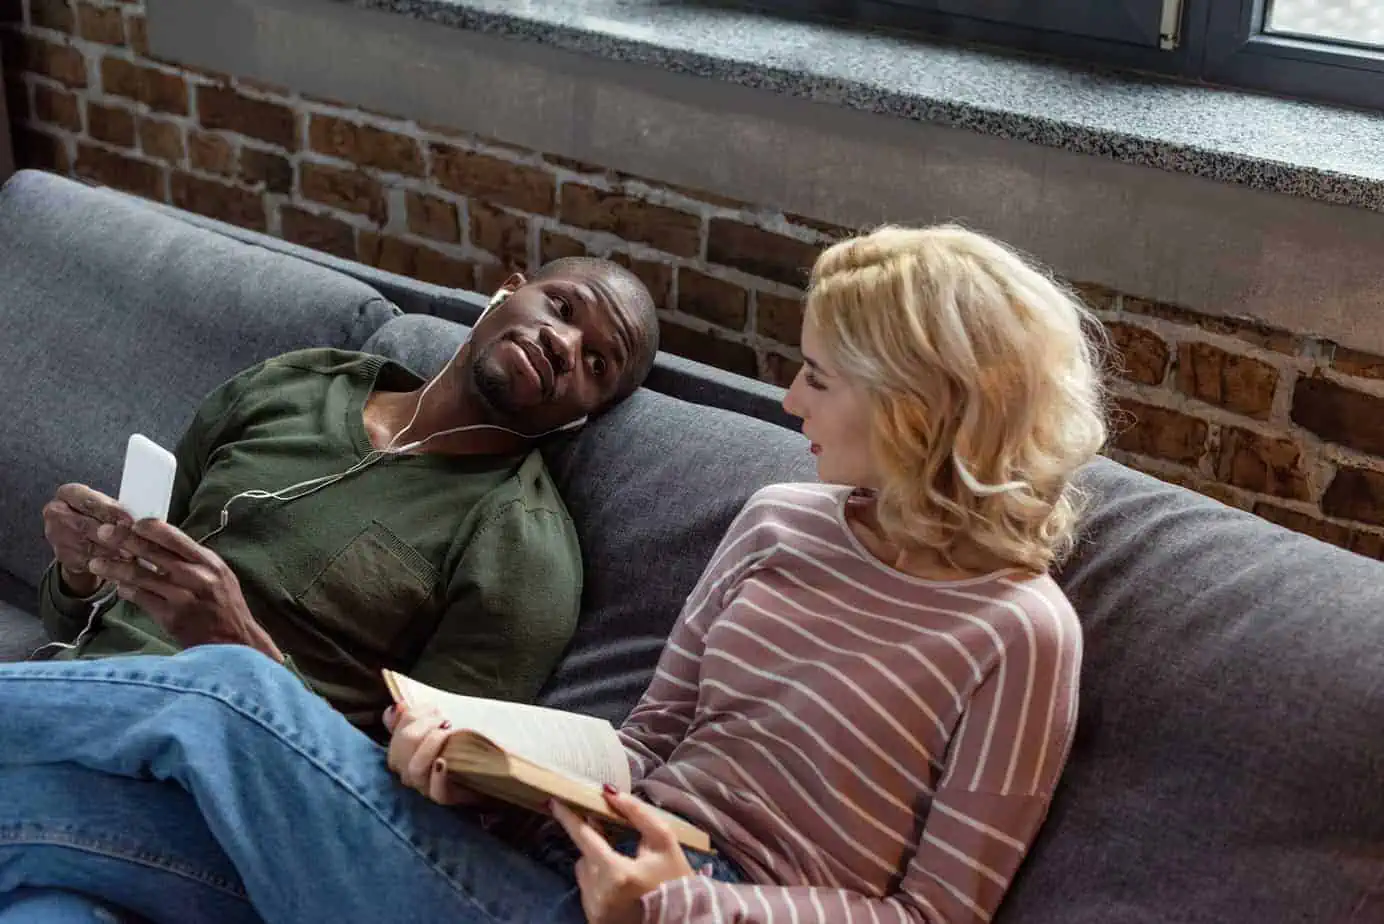 A man and a woman sitting on a couch